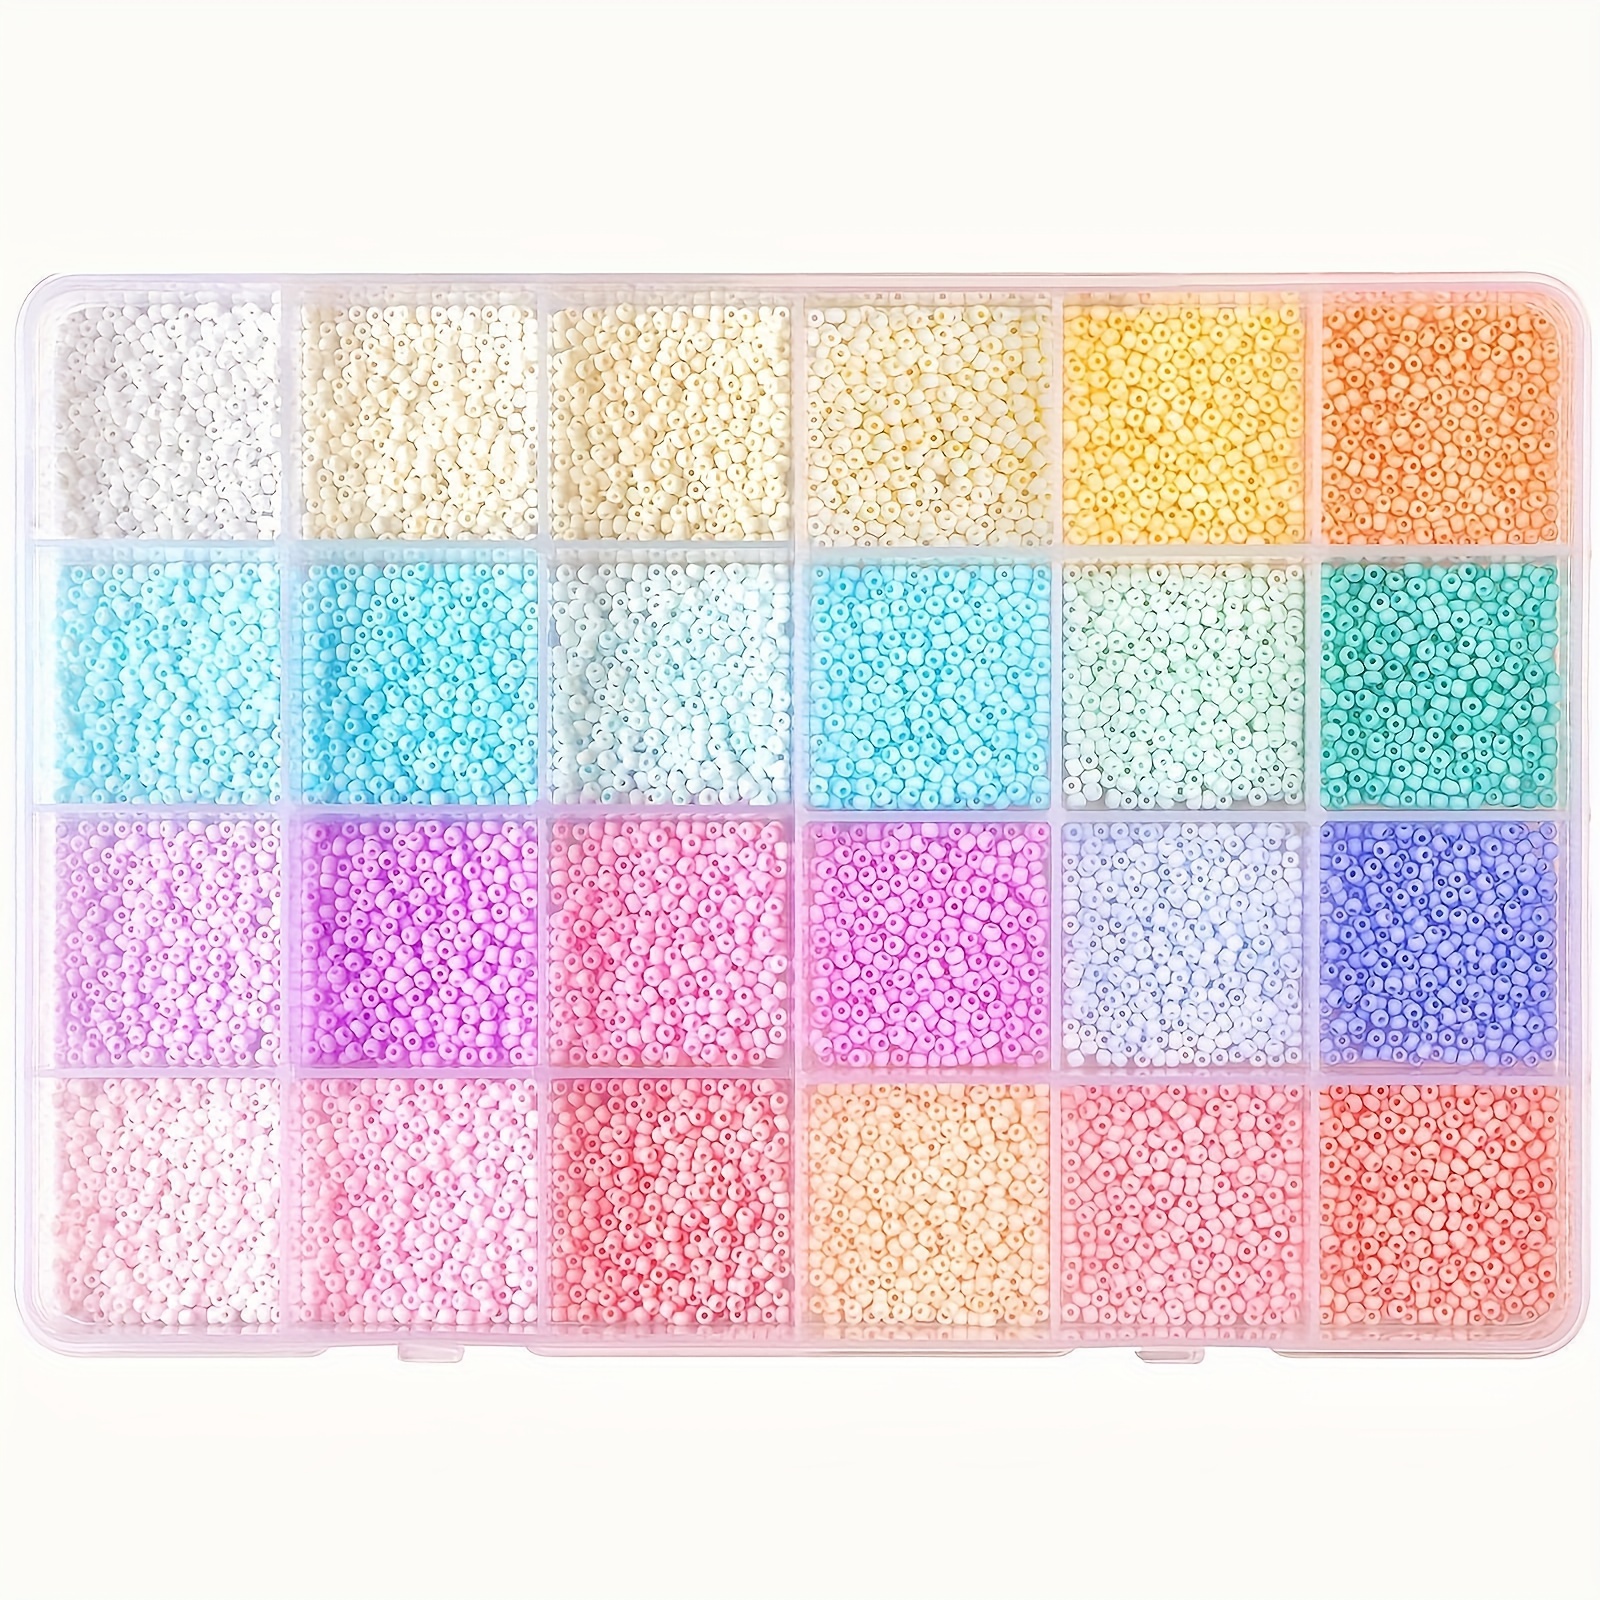 

2600pcs 4mm 24 Colors Boxed Glass Seed Beads Kit For Jewelry Making Diy Friendship Bracelet Necklace Earrings Clothing Accessories Craft Supplies